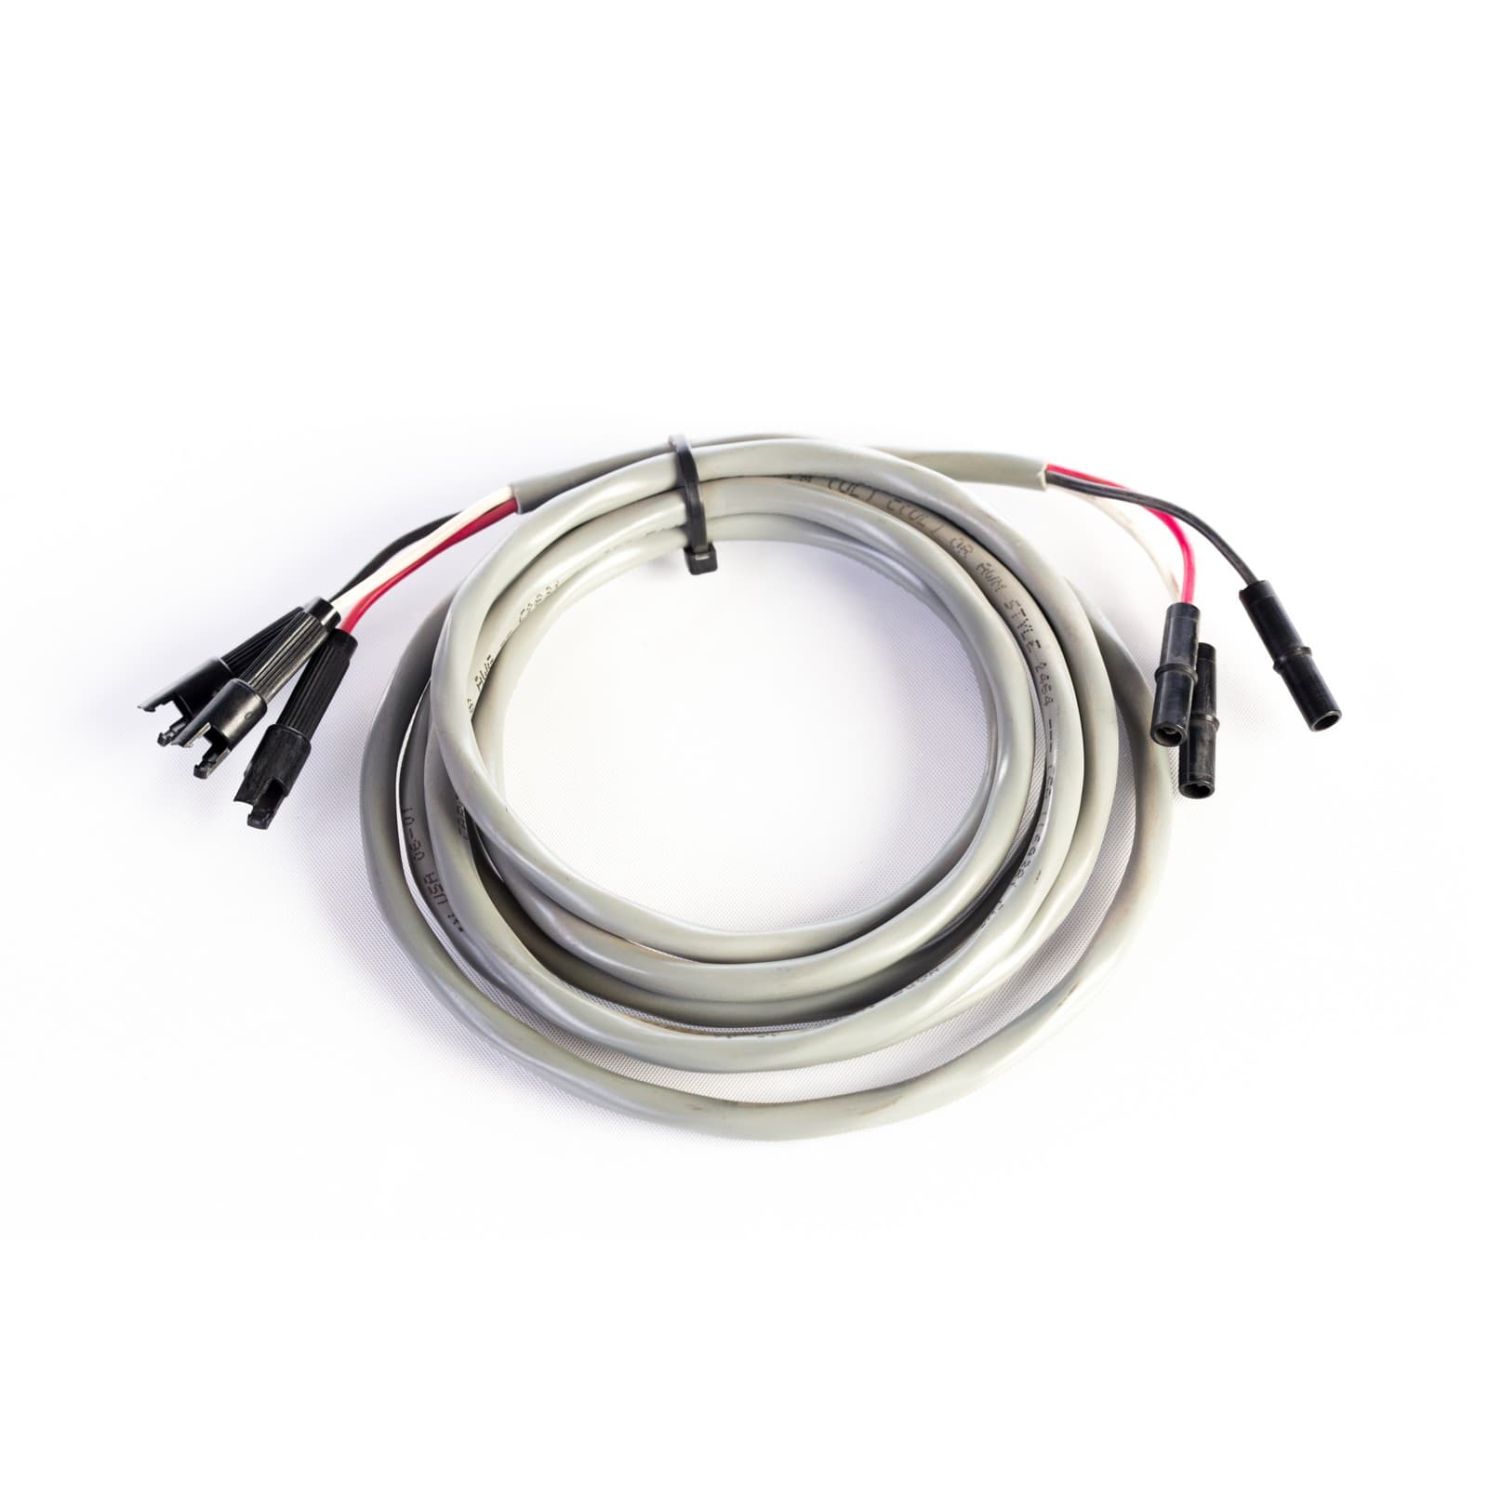 Planter Seed Sensor 3-Wire 6' Extension Cable